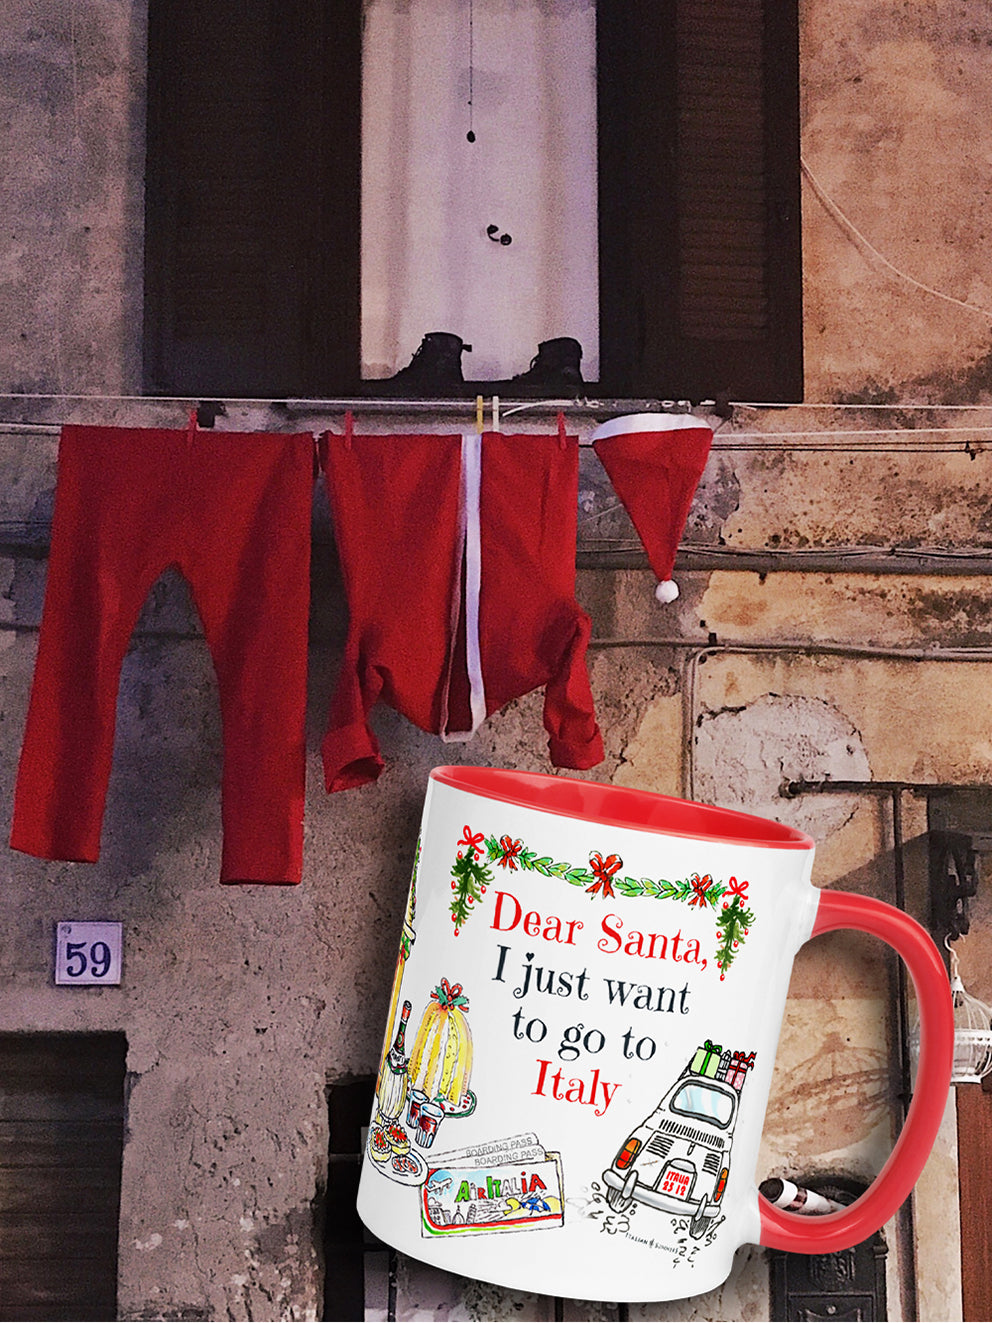 Italy Christmas mug Dear Santa, I just want to go to Italy. This cute mug represents sketches of a vintage Cinquecento seen from the back with presents on the roof, a ticket to Italy, Italian panettone, a book about Italy to cuddle up in front of the fireplace, a flask of good chianti wine, Italian presents and of course our best seller bag "I don't need therapy, I just need to got to Italy". Buon Natale :-)  Made with amore by Italian Summers